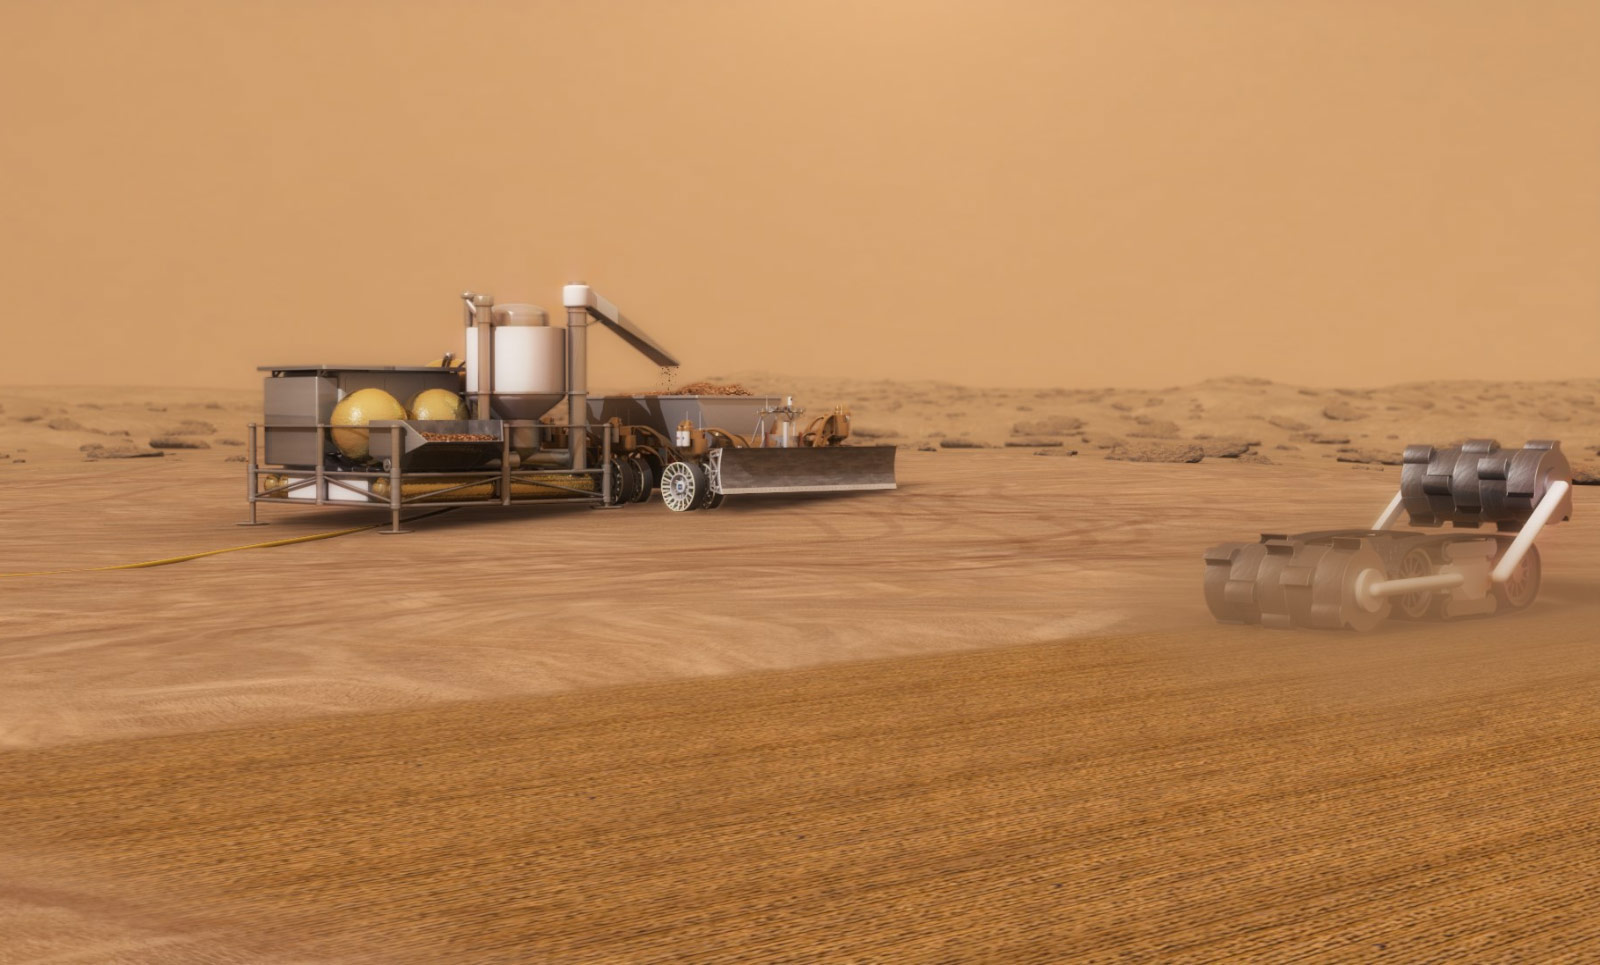 ISRU system concept for autonomous robotic excavation and processing of Mars soil to extract water for use in exploration missions.